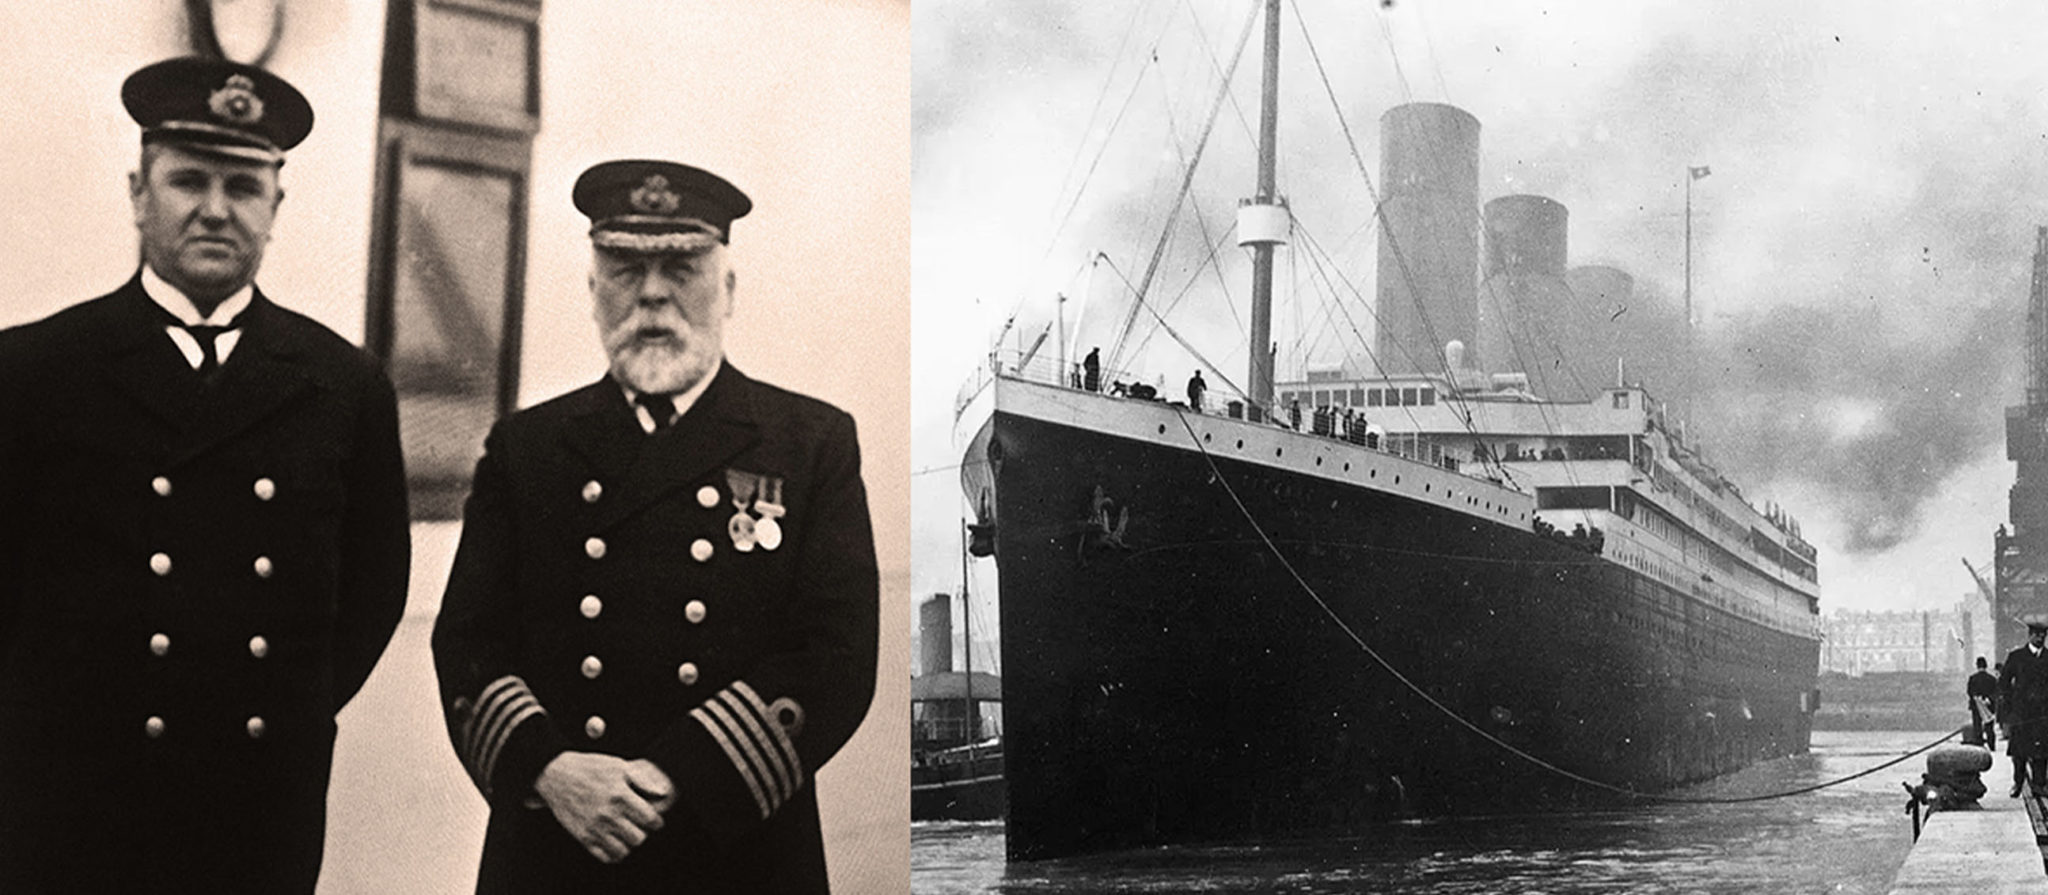 Fatal Facts About The Titanic, The Wreck Of The Century